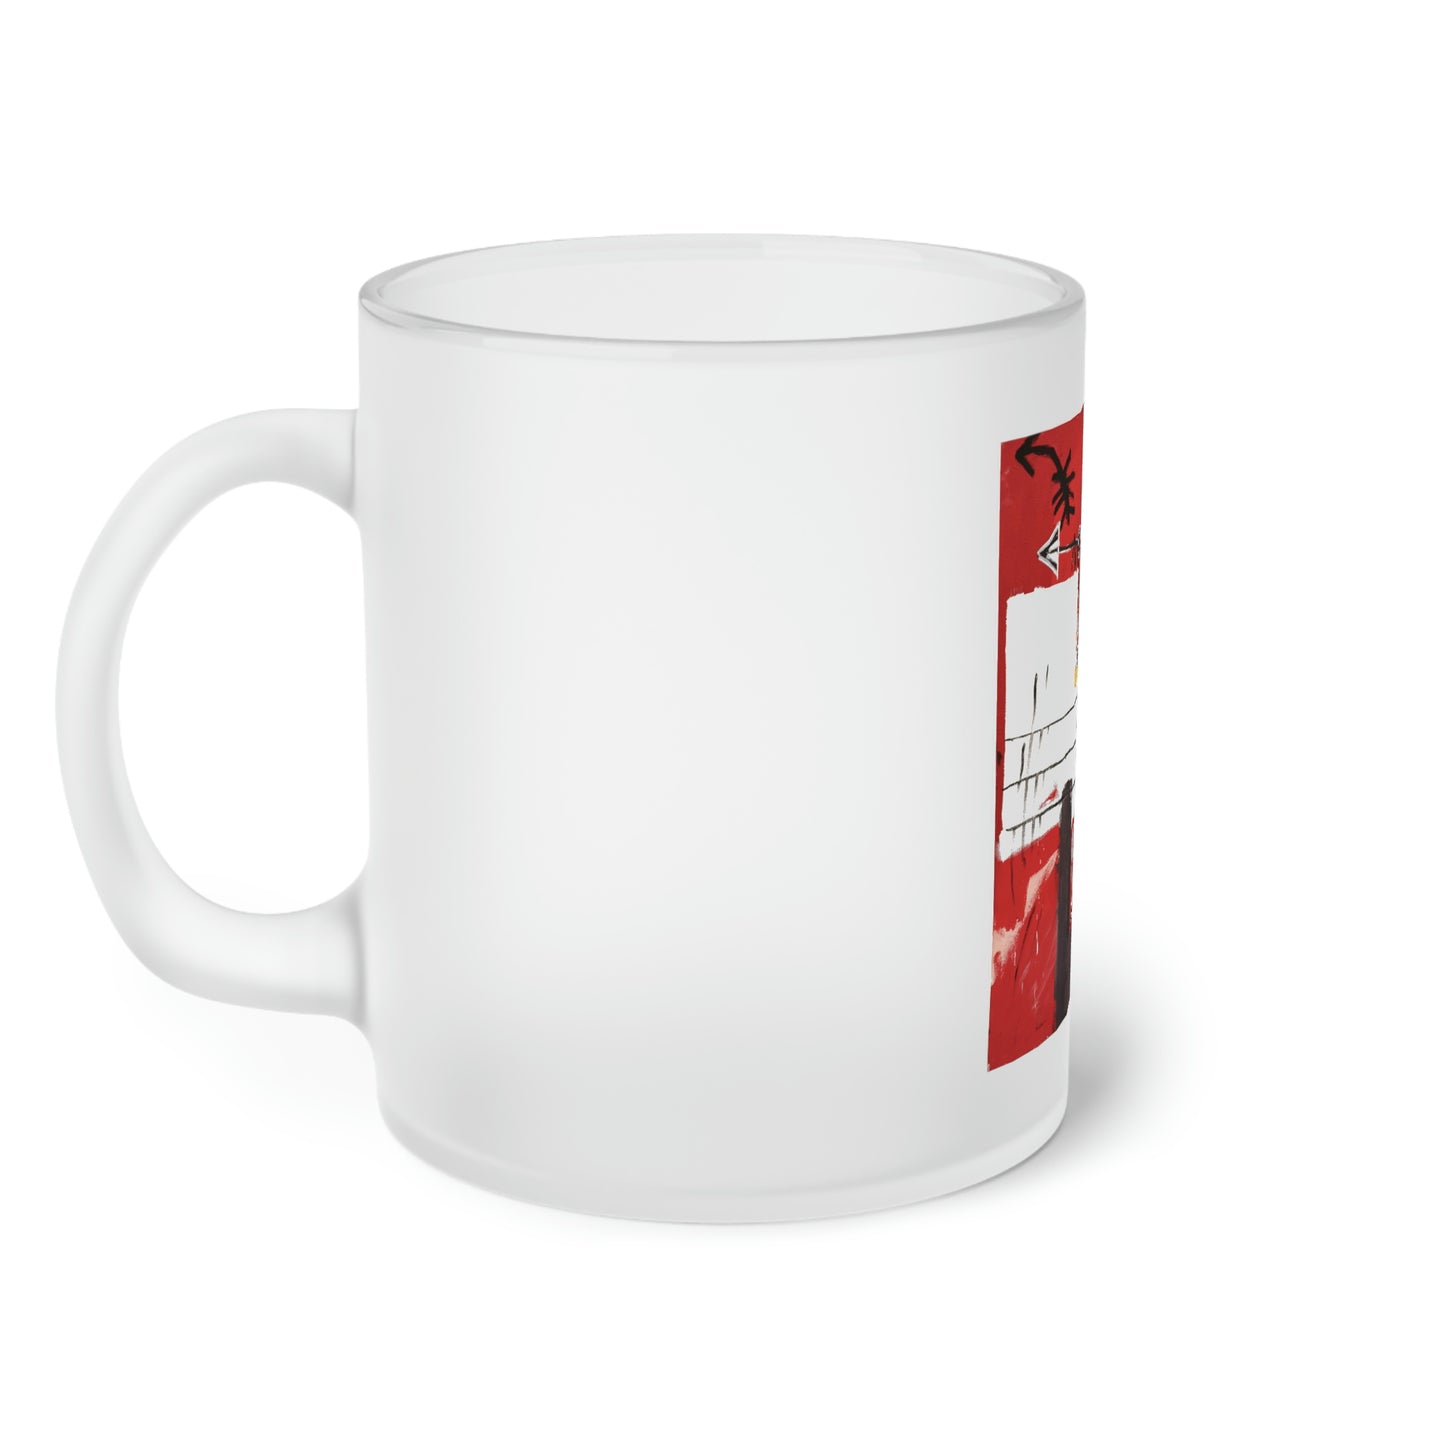 Jean-Michel Basquiat "The Ring" Frosted Glass Mug